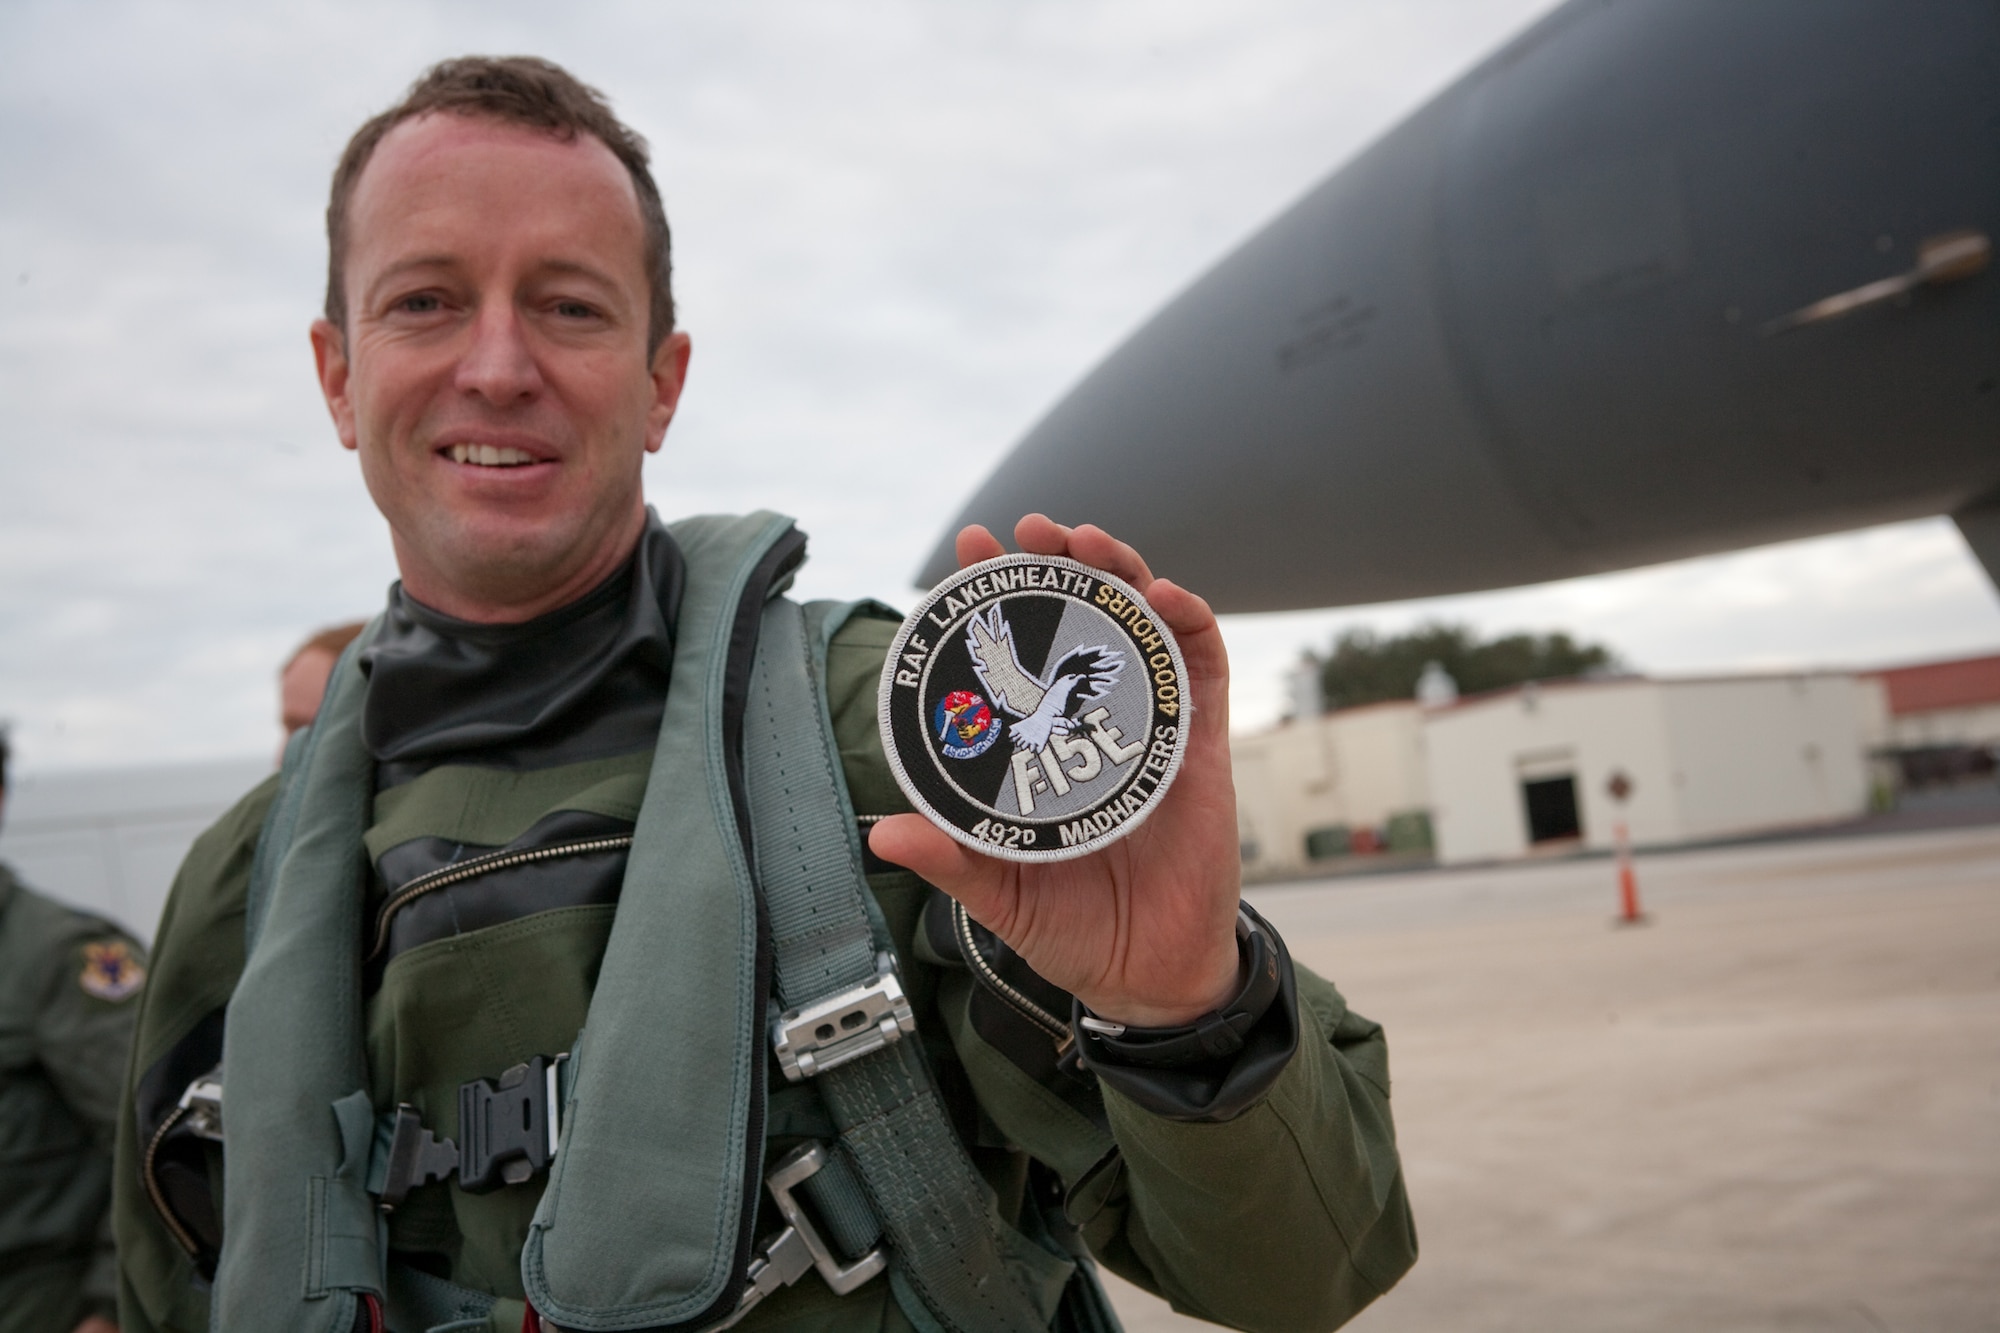 Seventeen years in the making, Lt. Col. David Iverson holds the 4,000 hours patch he can now wear after a 10.1 hour flight in an F-15E Strike Eagle from Royal Air Force Lakenheath, England, to Lackland Air Force Base, Texas, Jan. 11, 2010. (Courtesy Boeing photo/Lance Cheung)